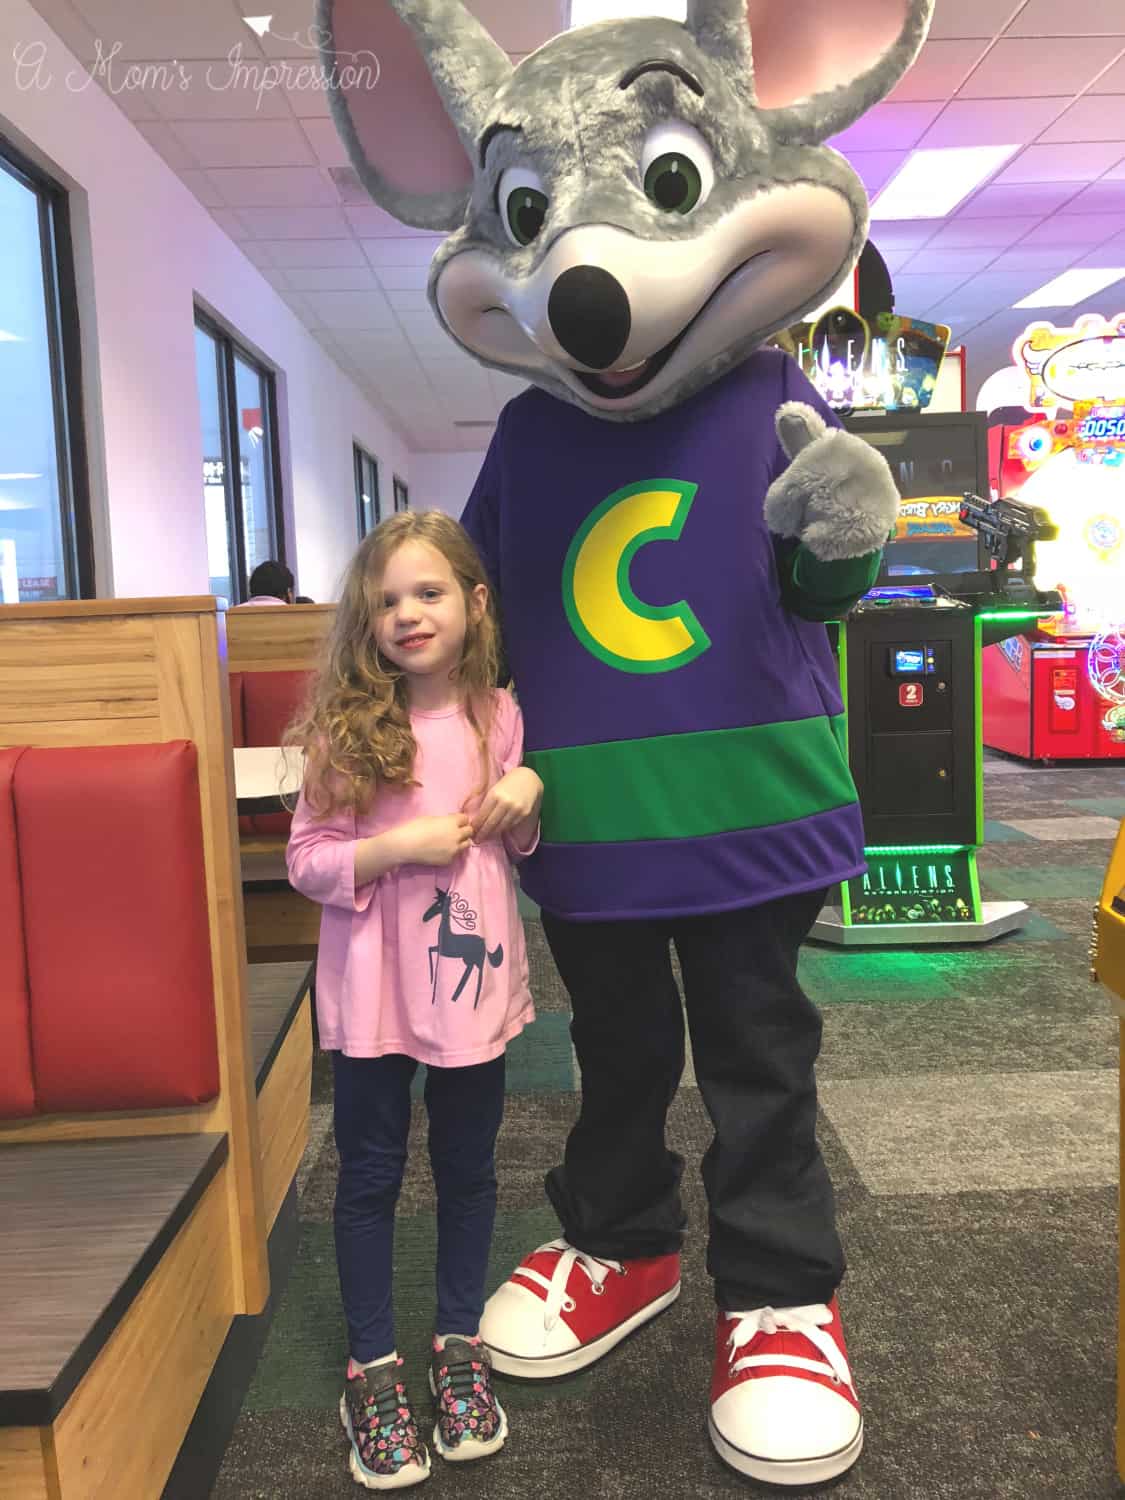 Guest Post: Castleton Location Reopens with Fun for the Whole Family by A Mom’s Impression